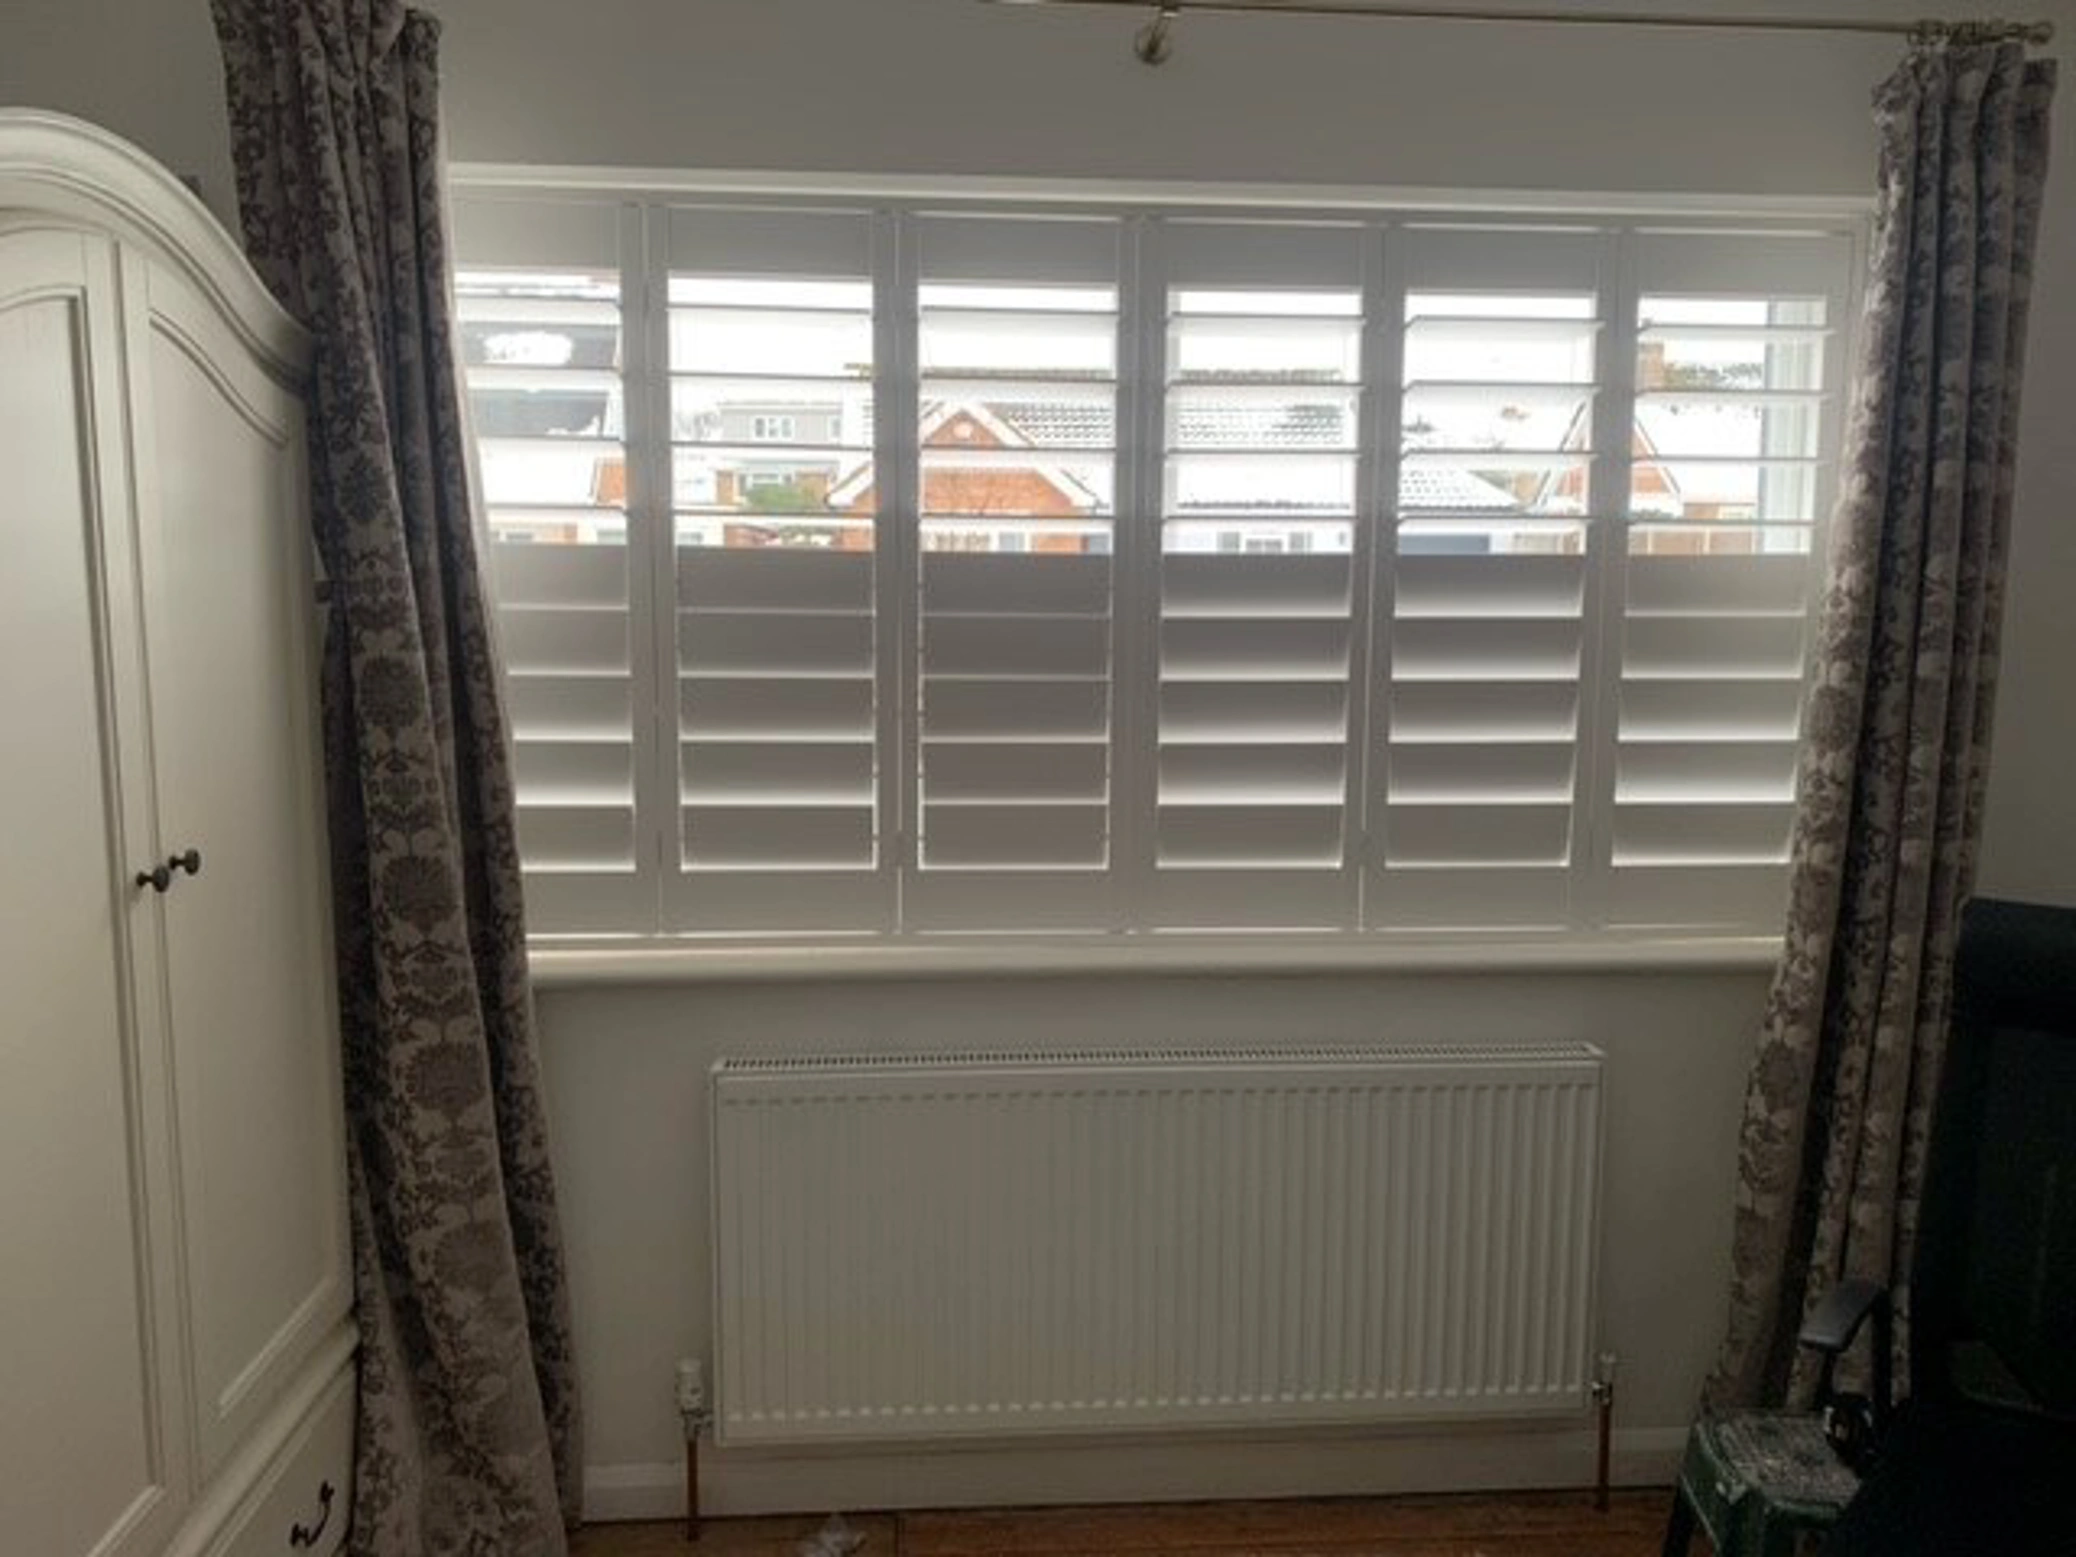 Vivid White wooden shutters with patterned curtains and large slats